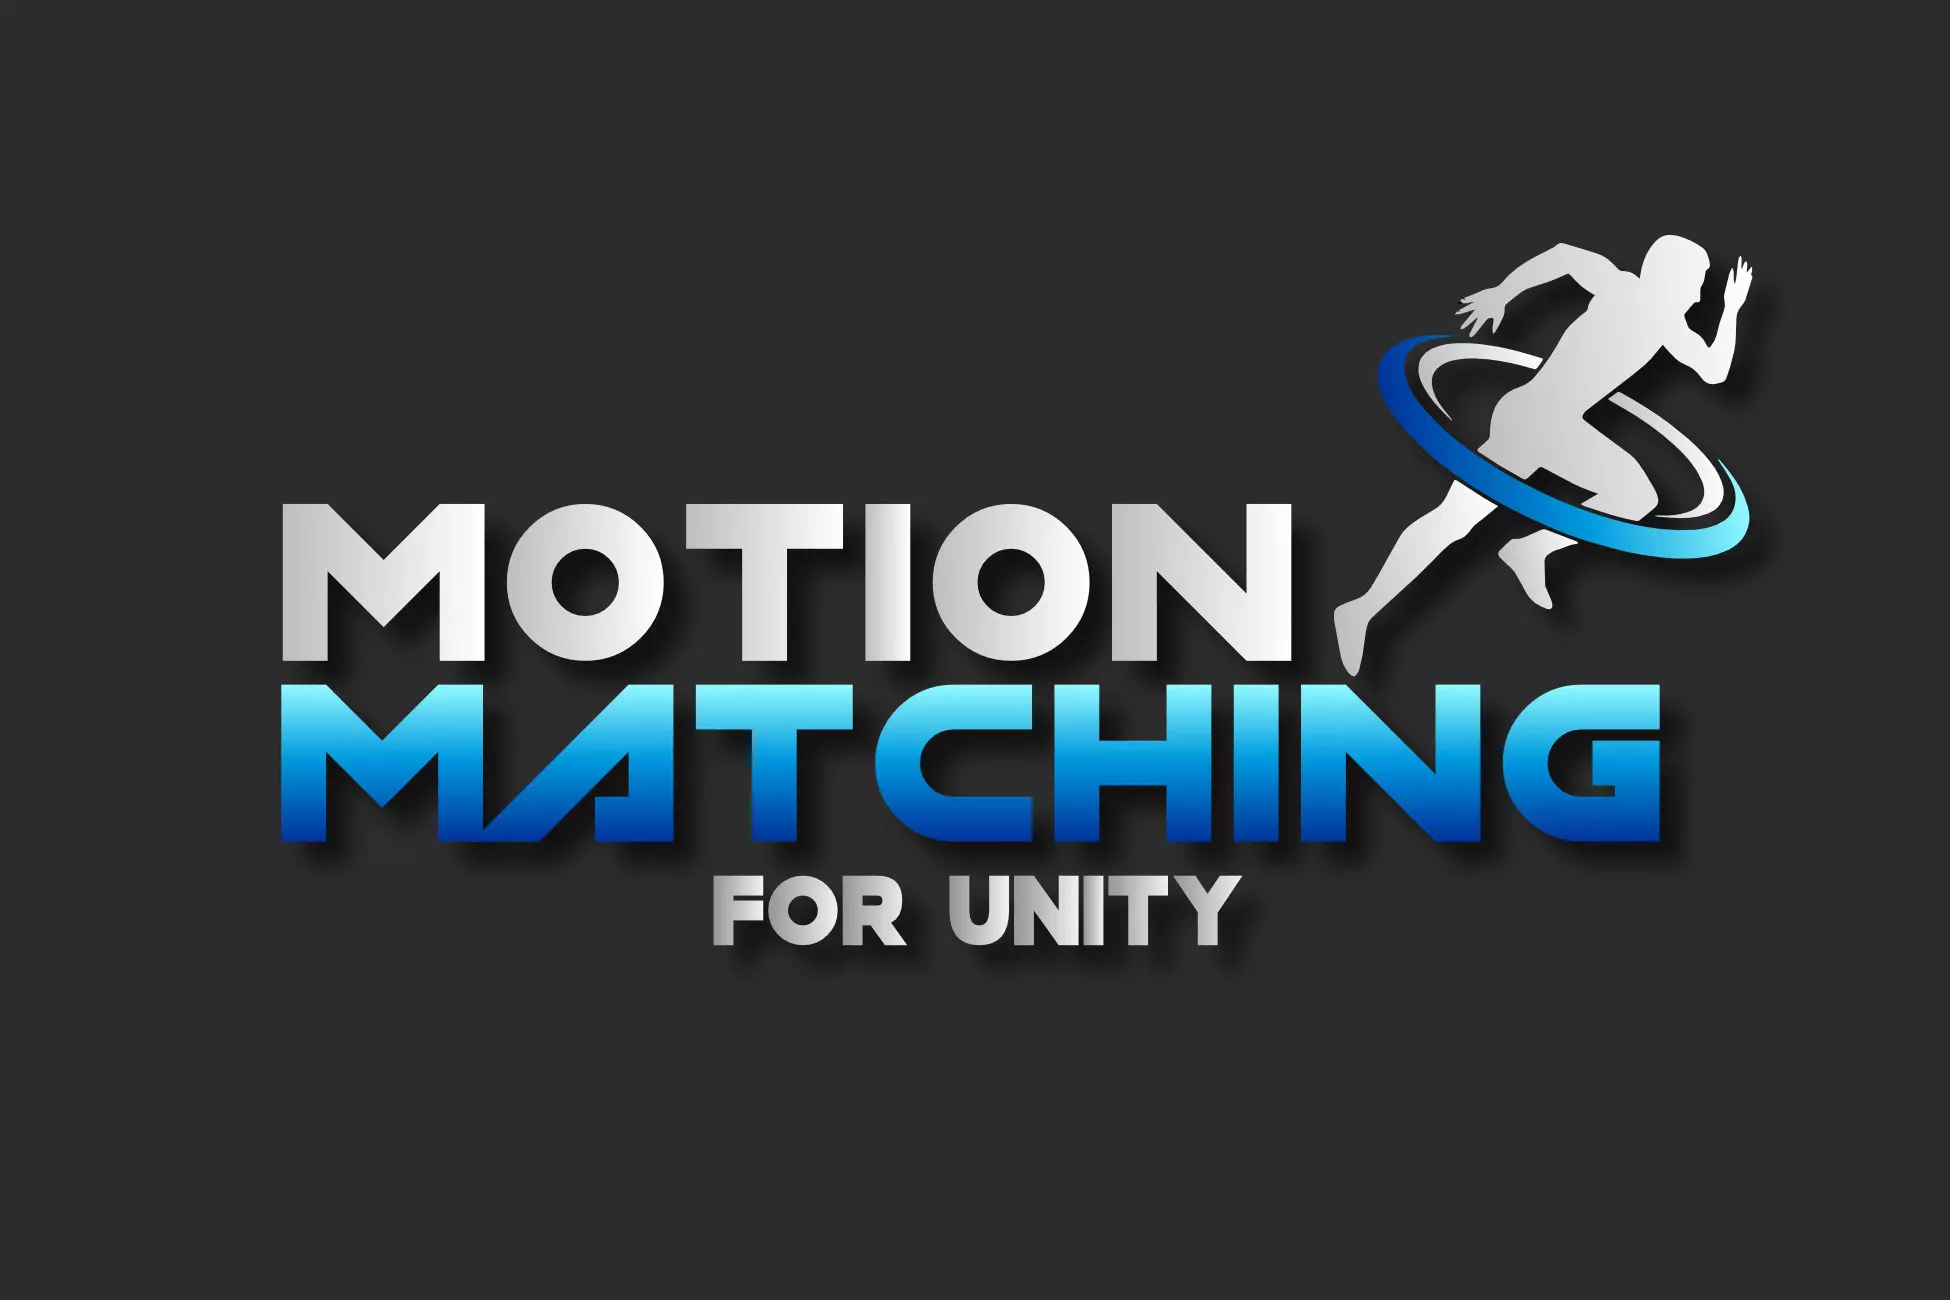 Motion Matching for Unity